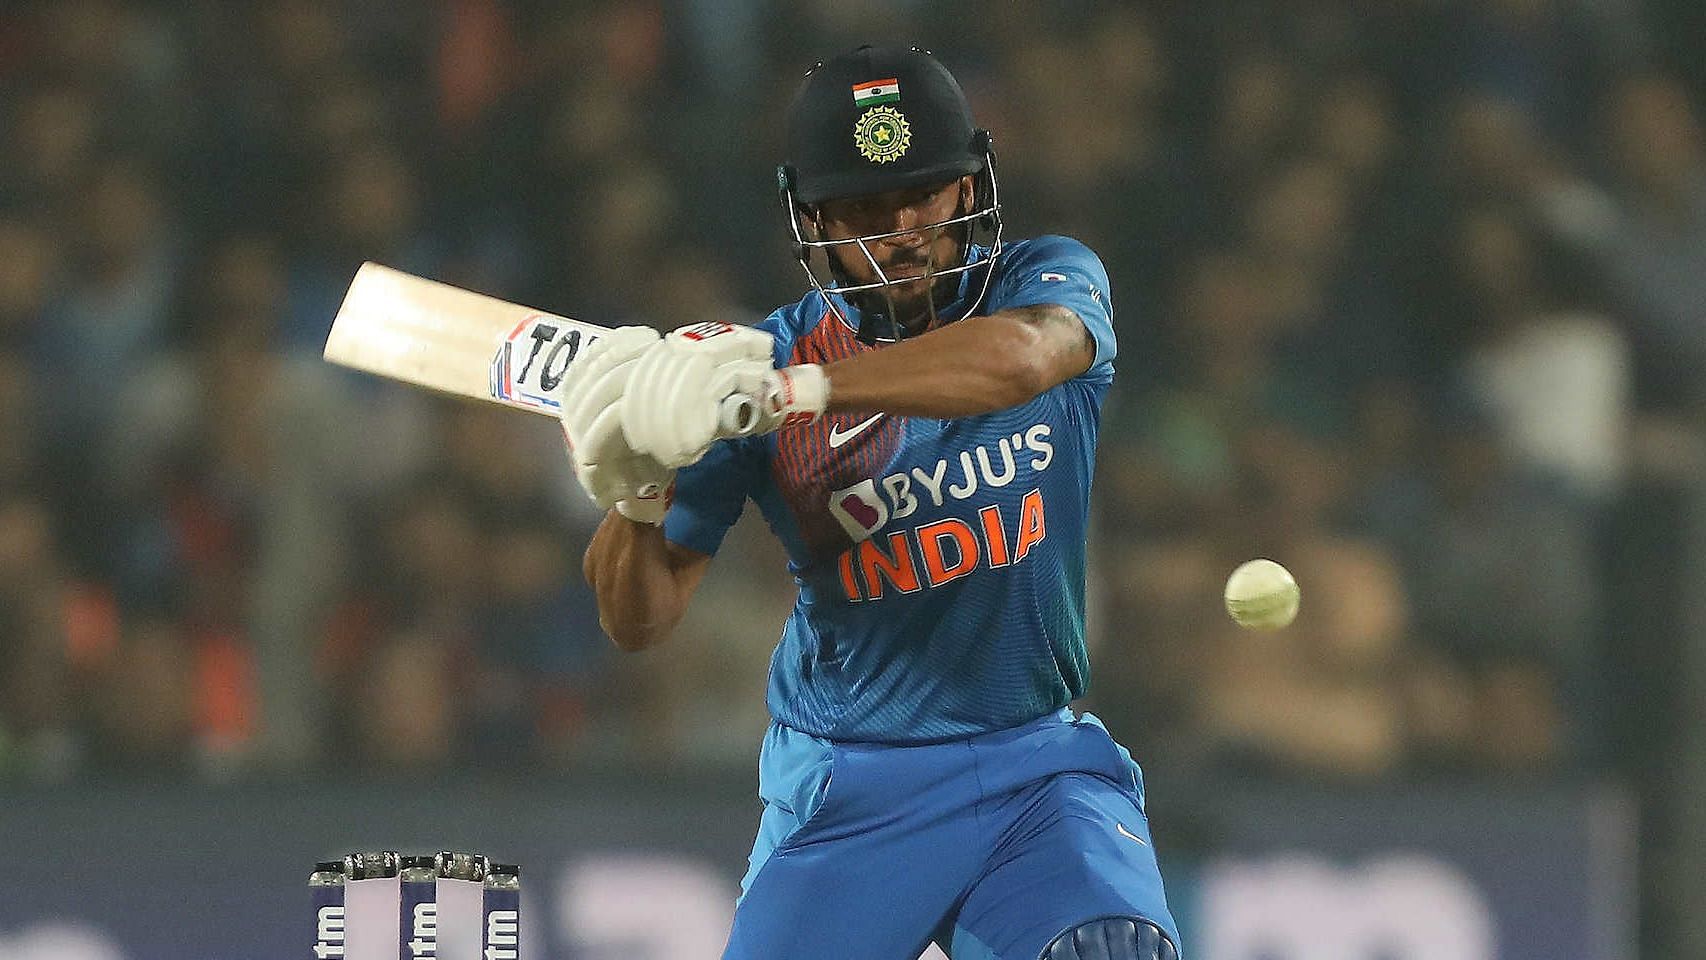 Manish Pandey scored an unbeaten 50 off 36 balls to help India put up a decent 165/8 on board against New Zealand in the 4th T20 on Friday.